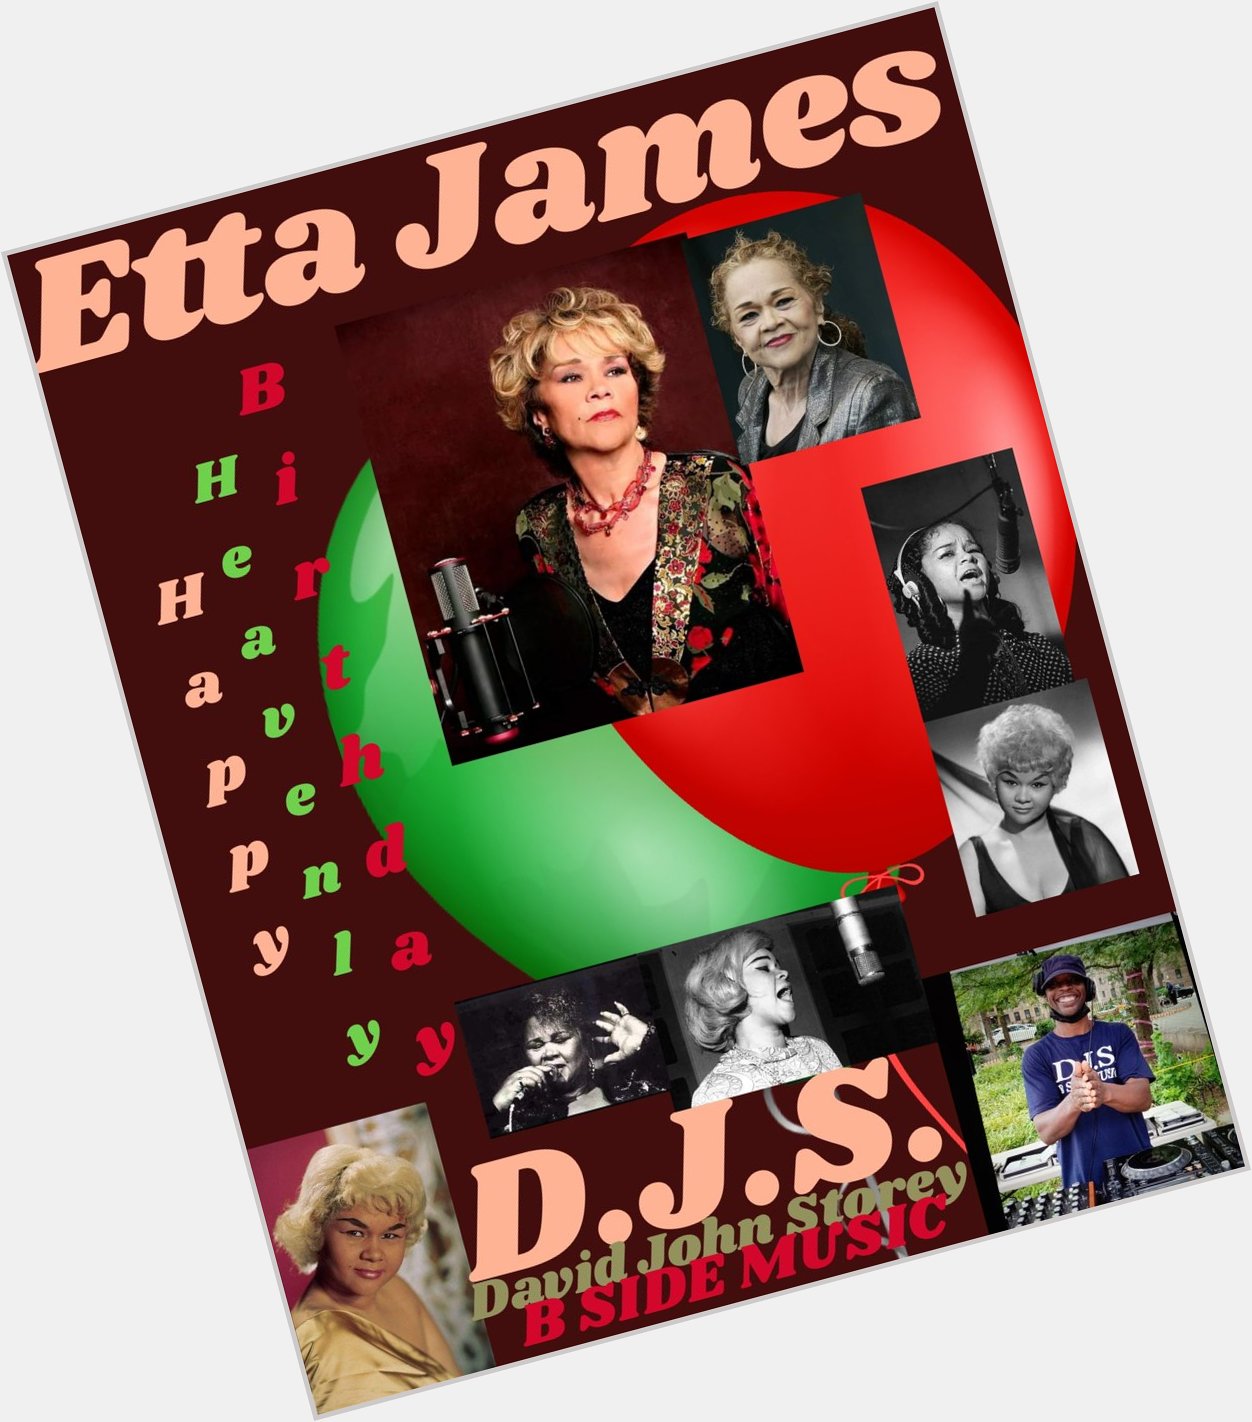 I(D.J.S.)\"B SIDE\" taking time to say Happy Heavenly Birthday to Singer \"ETTA JAMES\"!!!! 